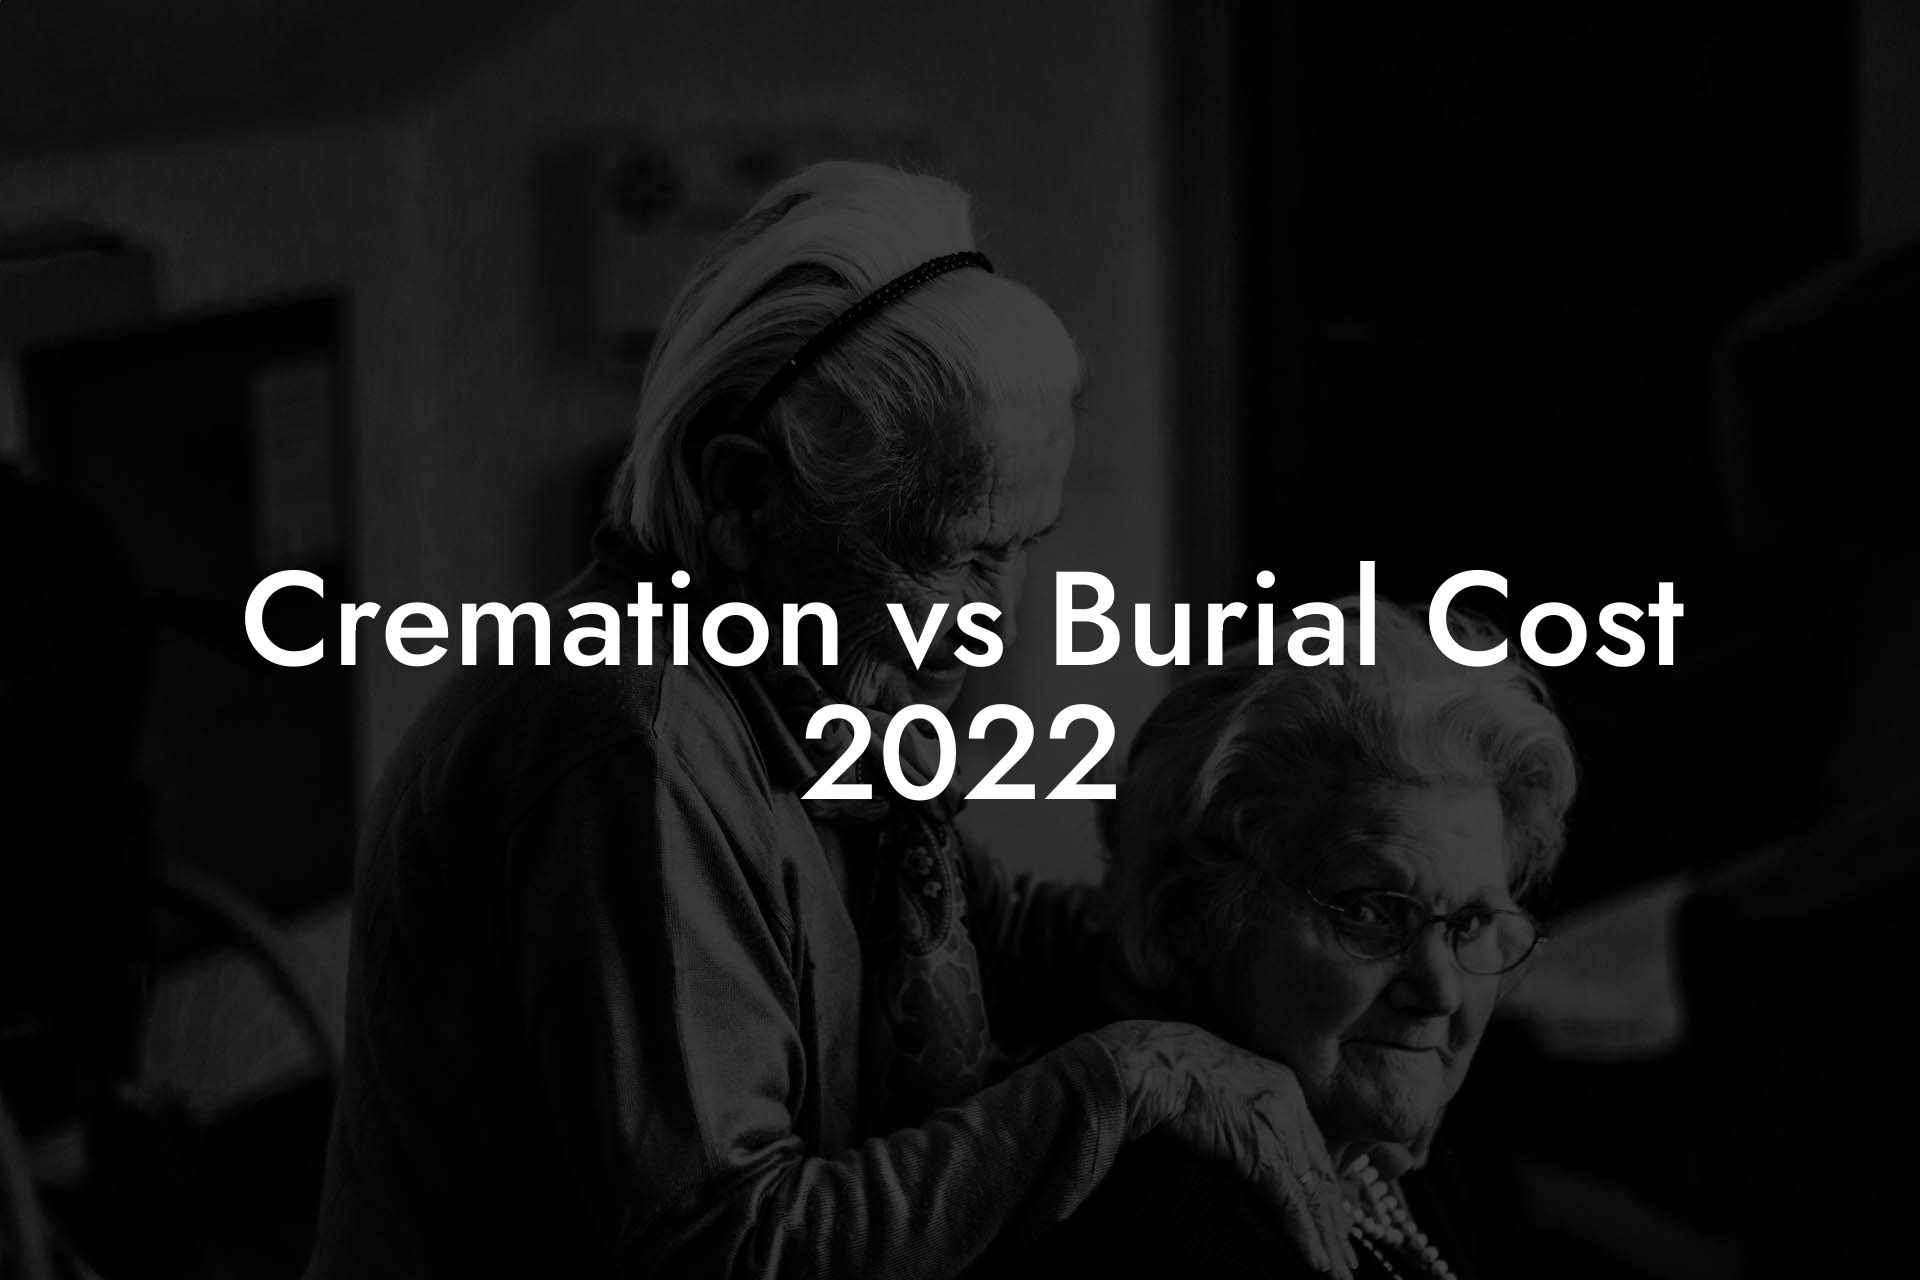 Cremation vs Burial Cost 2022